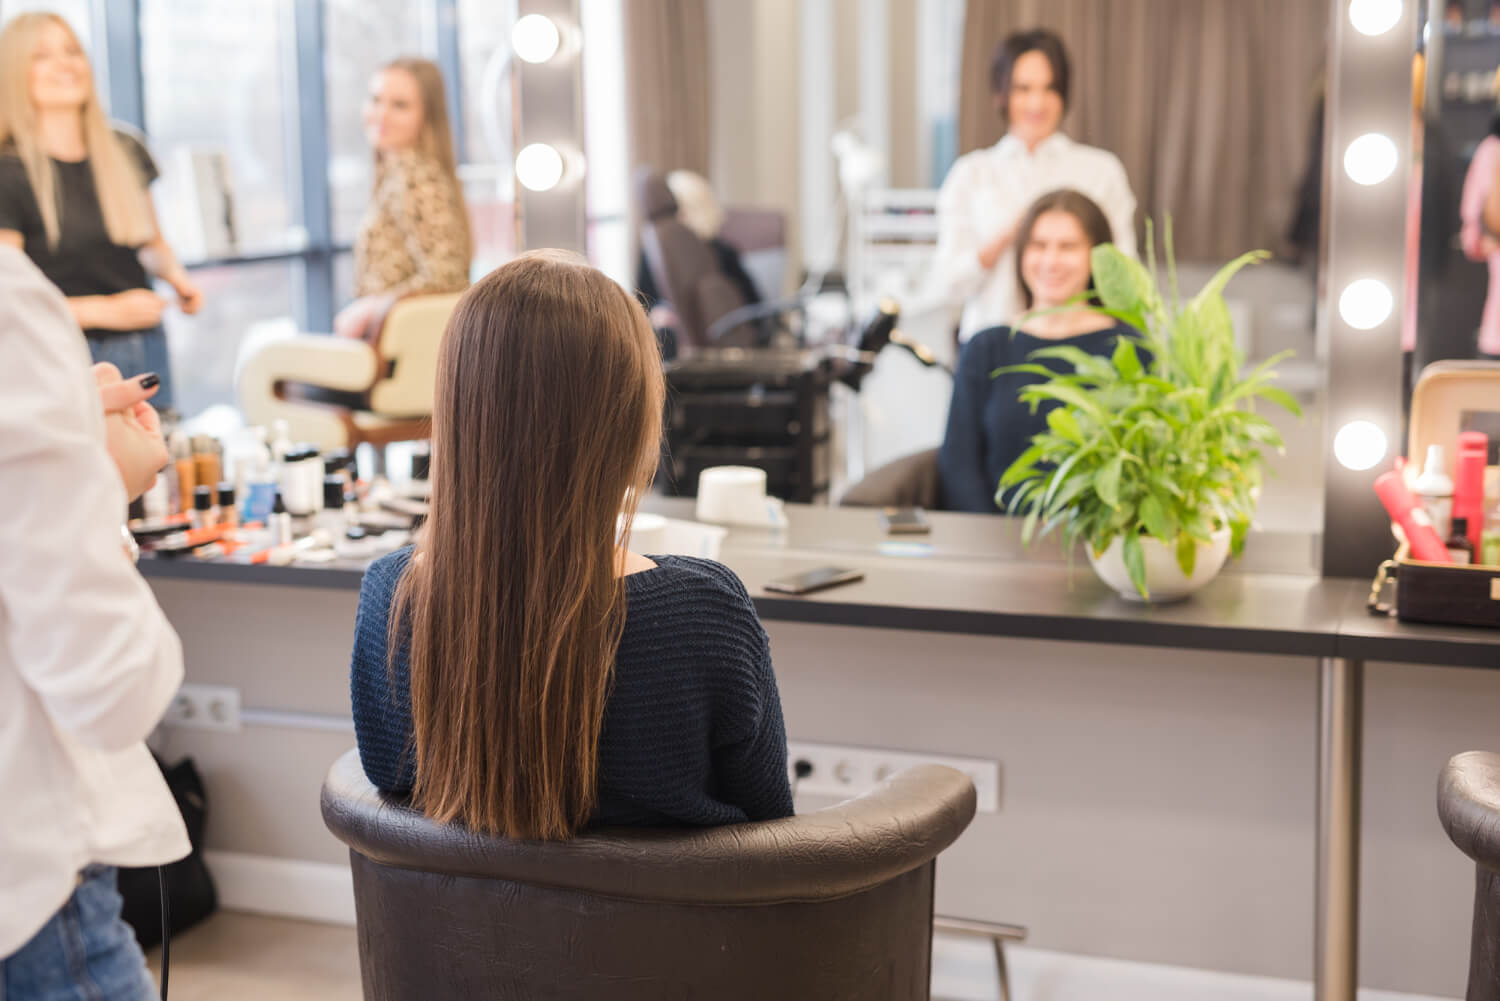 Pretoria’s Finest: A Guide to Top Beauty Salons and Their Services